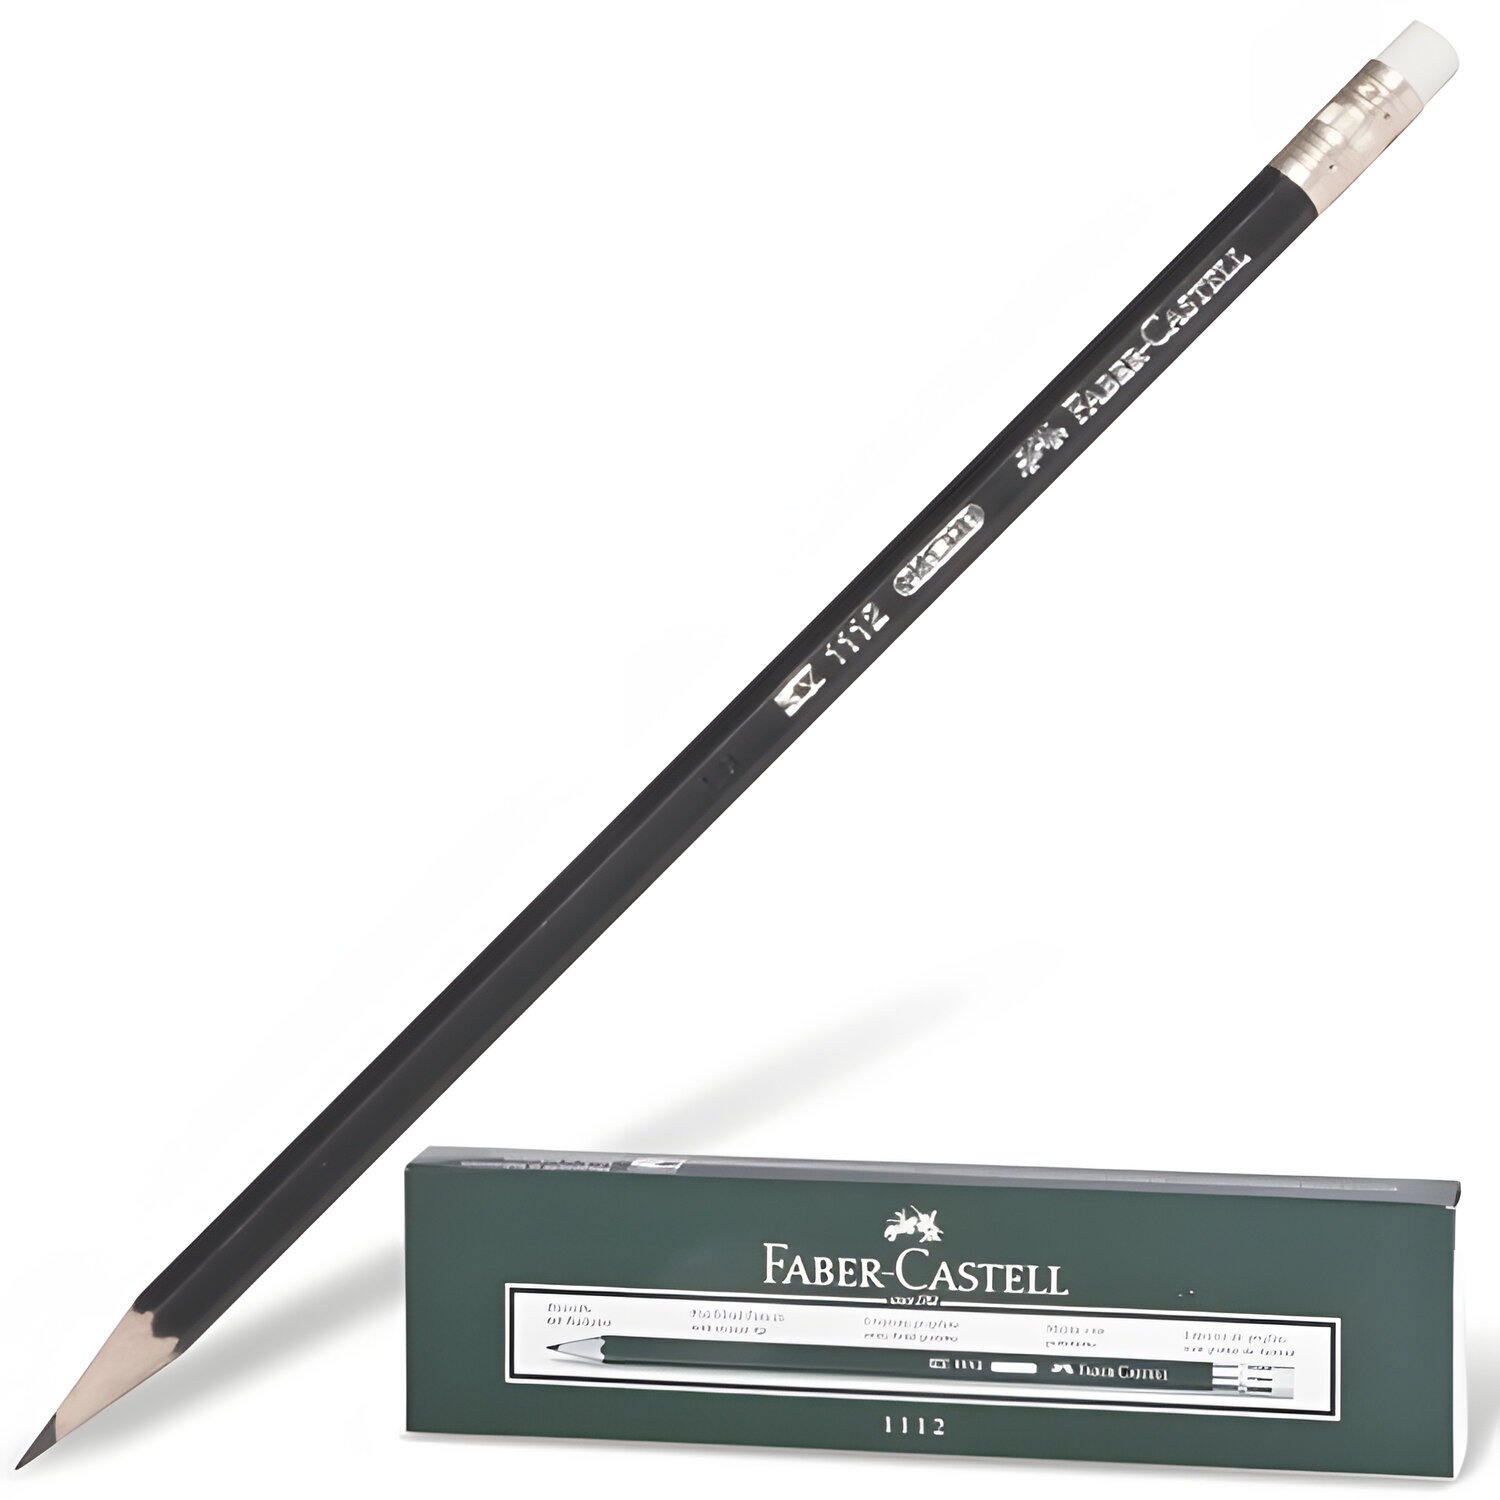  FABER-CASTELL 111200,  36 .